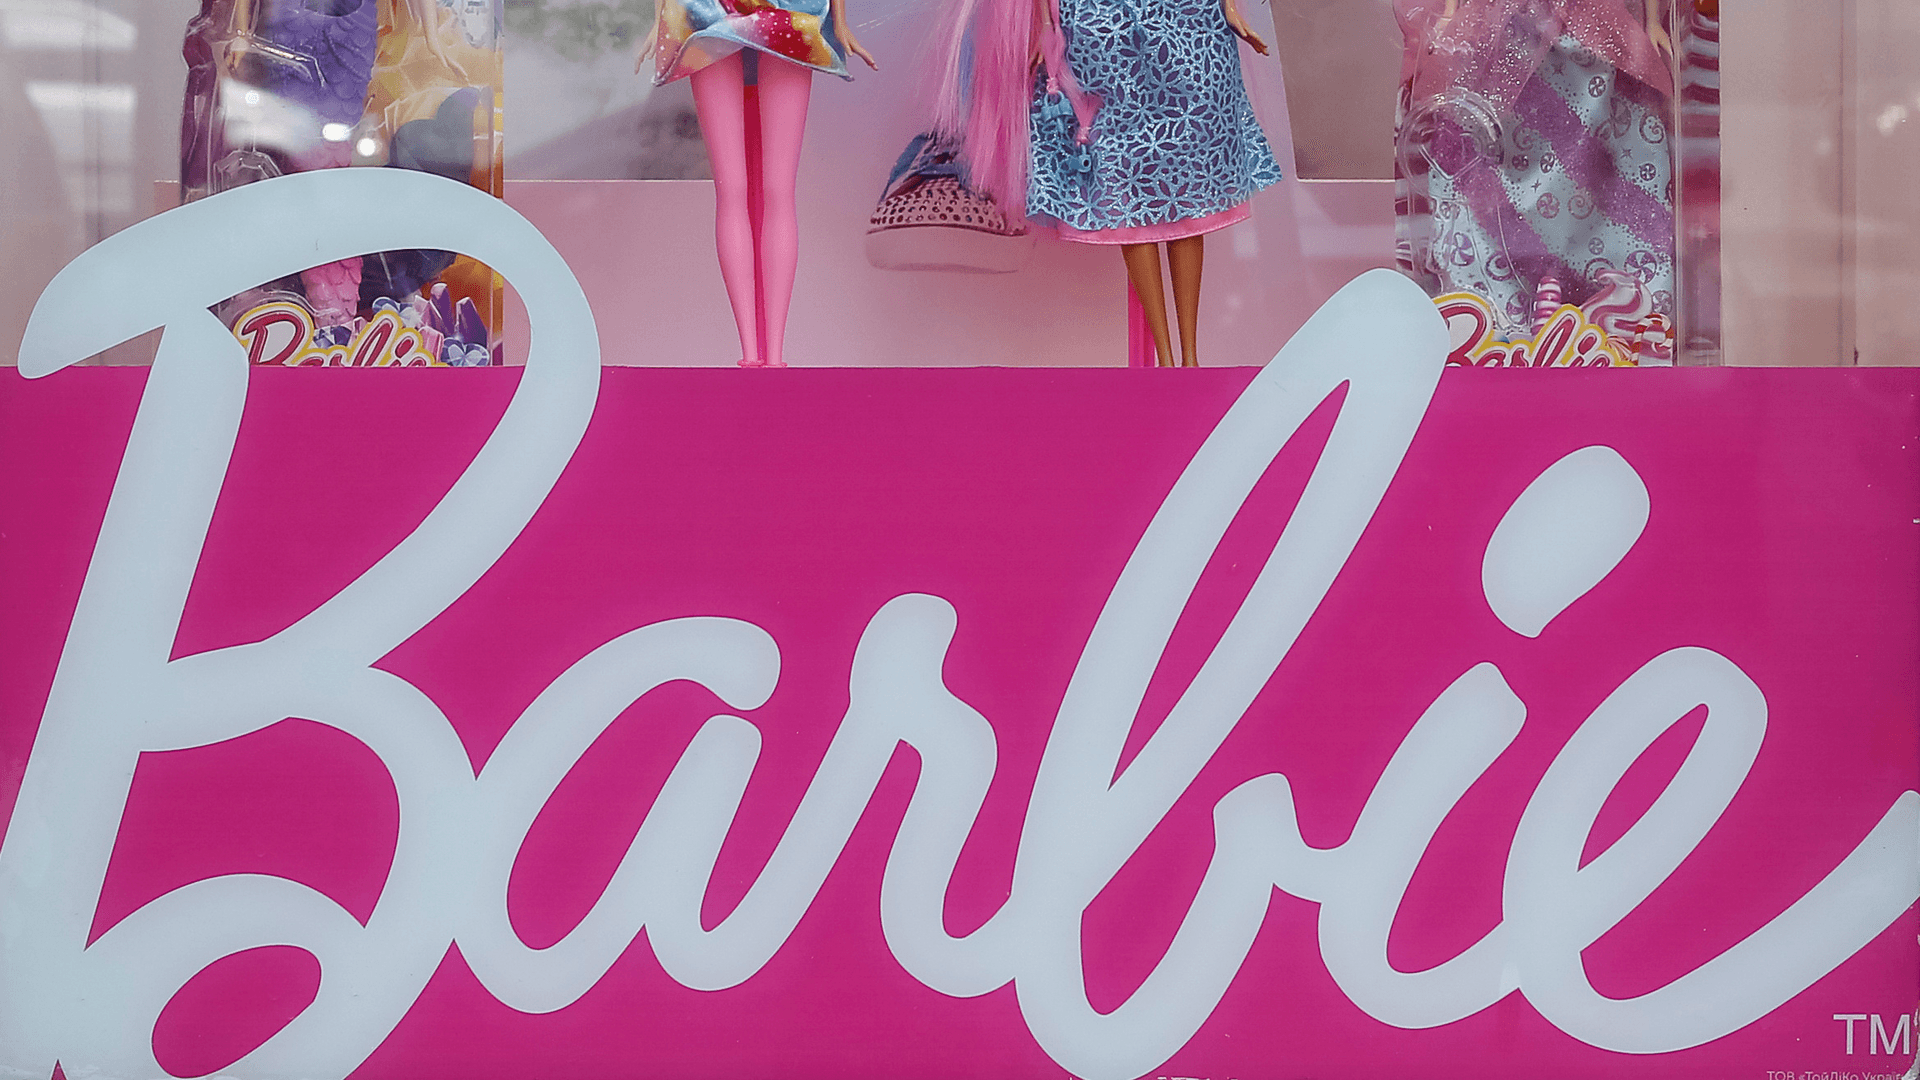 Barbie dolls are seen in a window of a toy store.